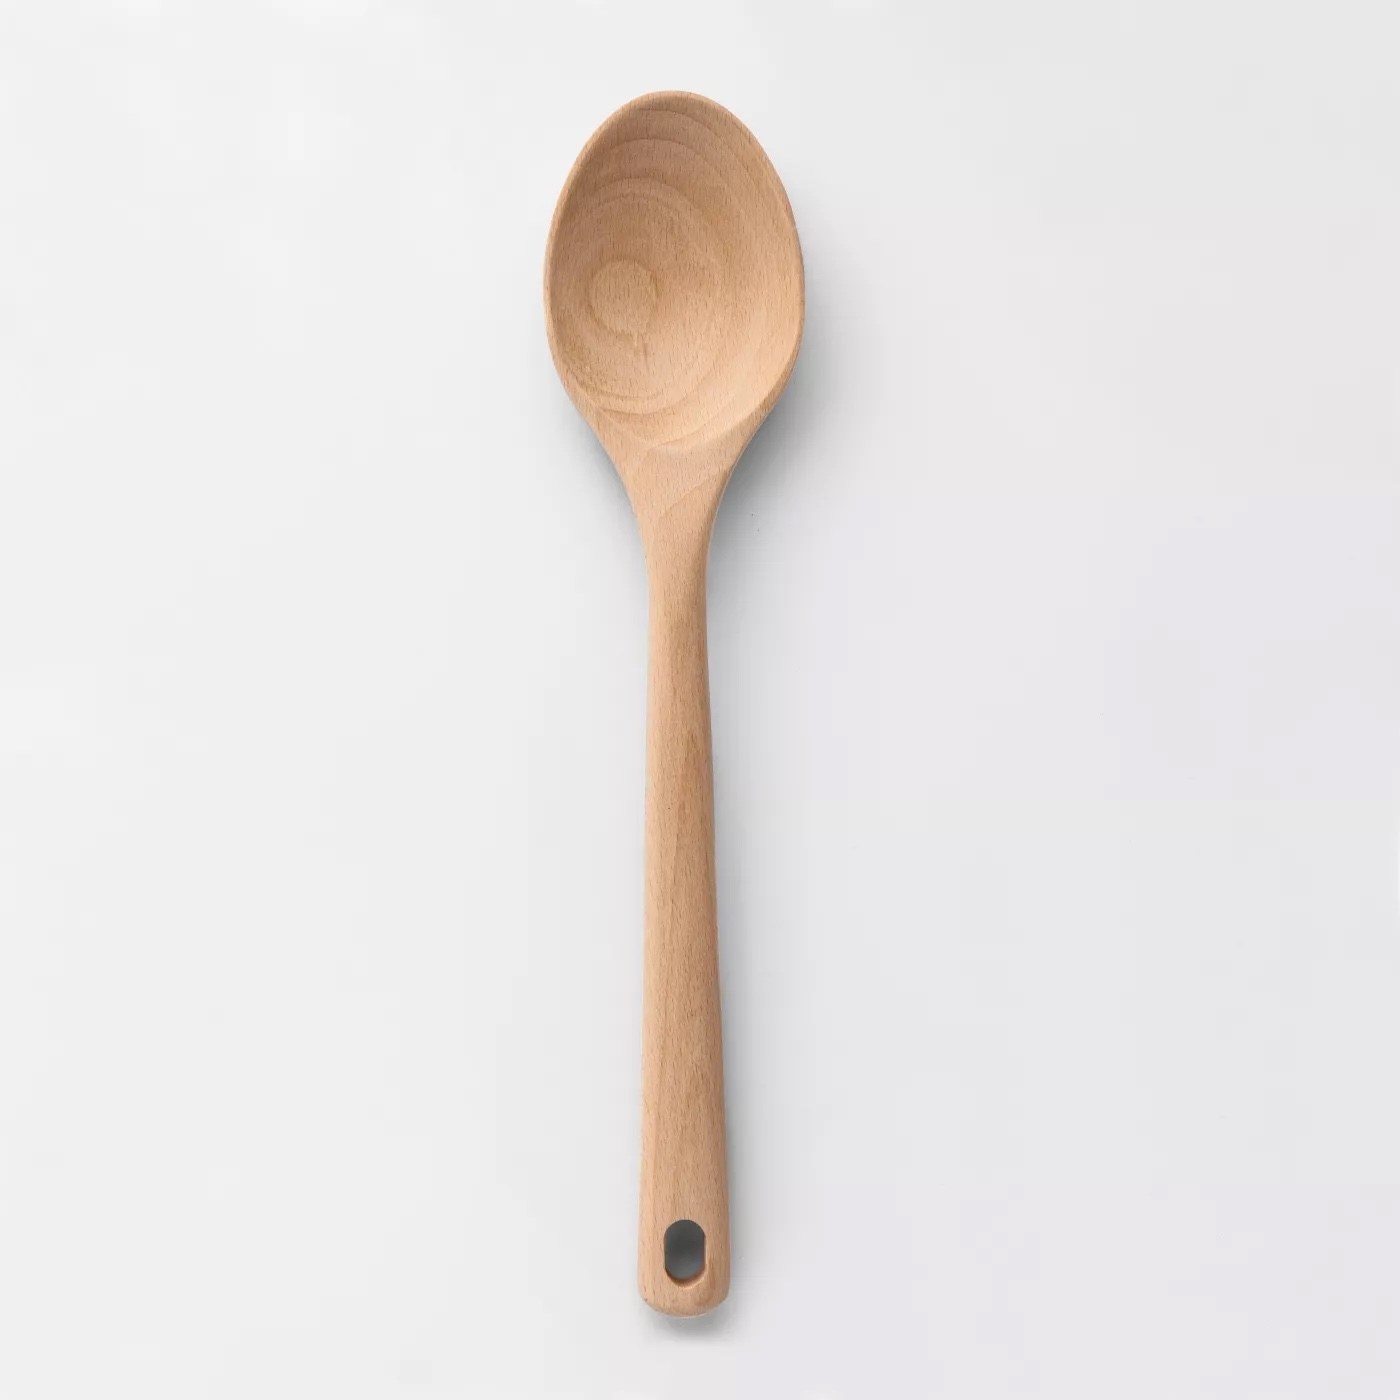 the wooden spoon